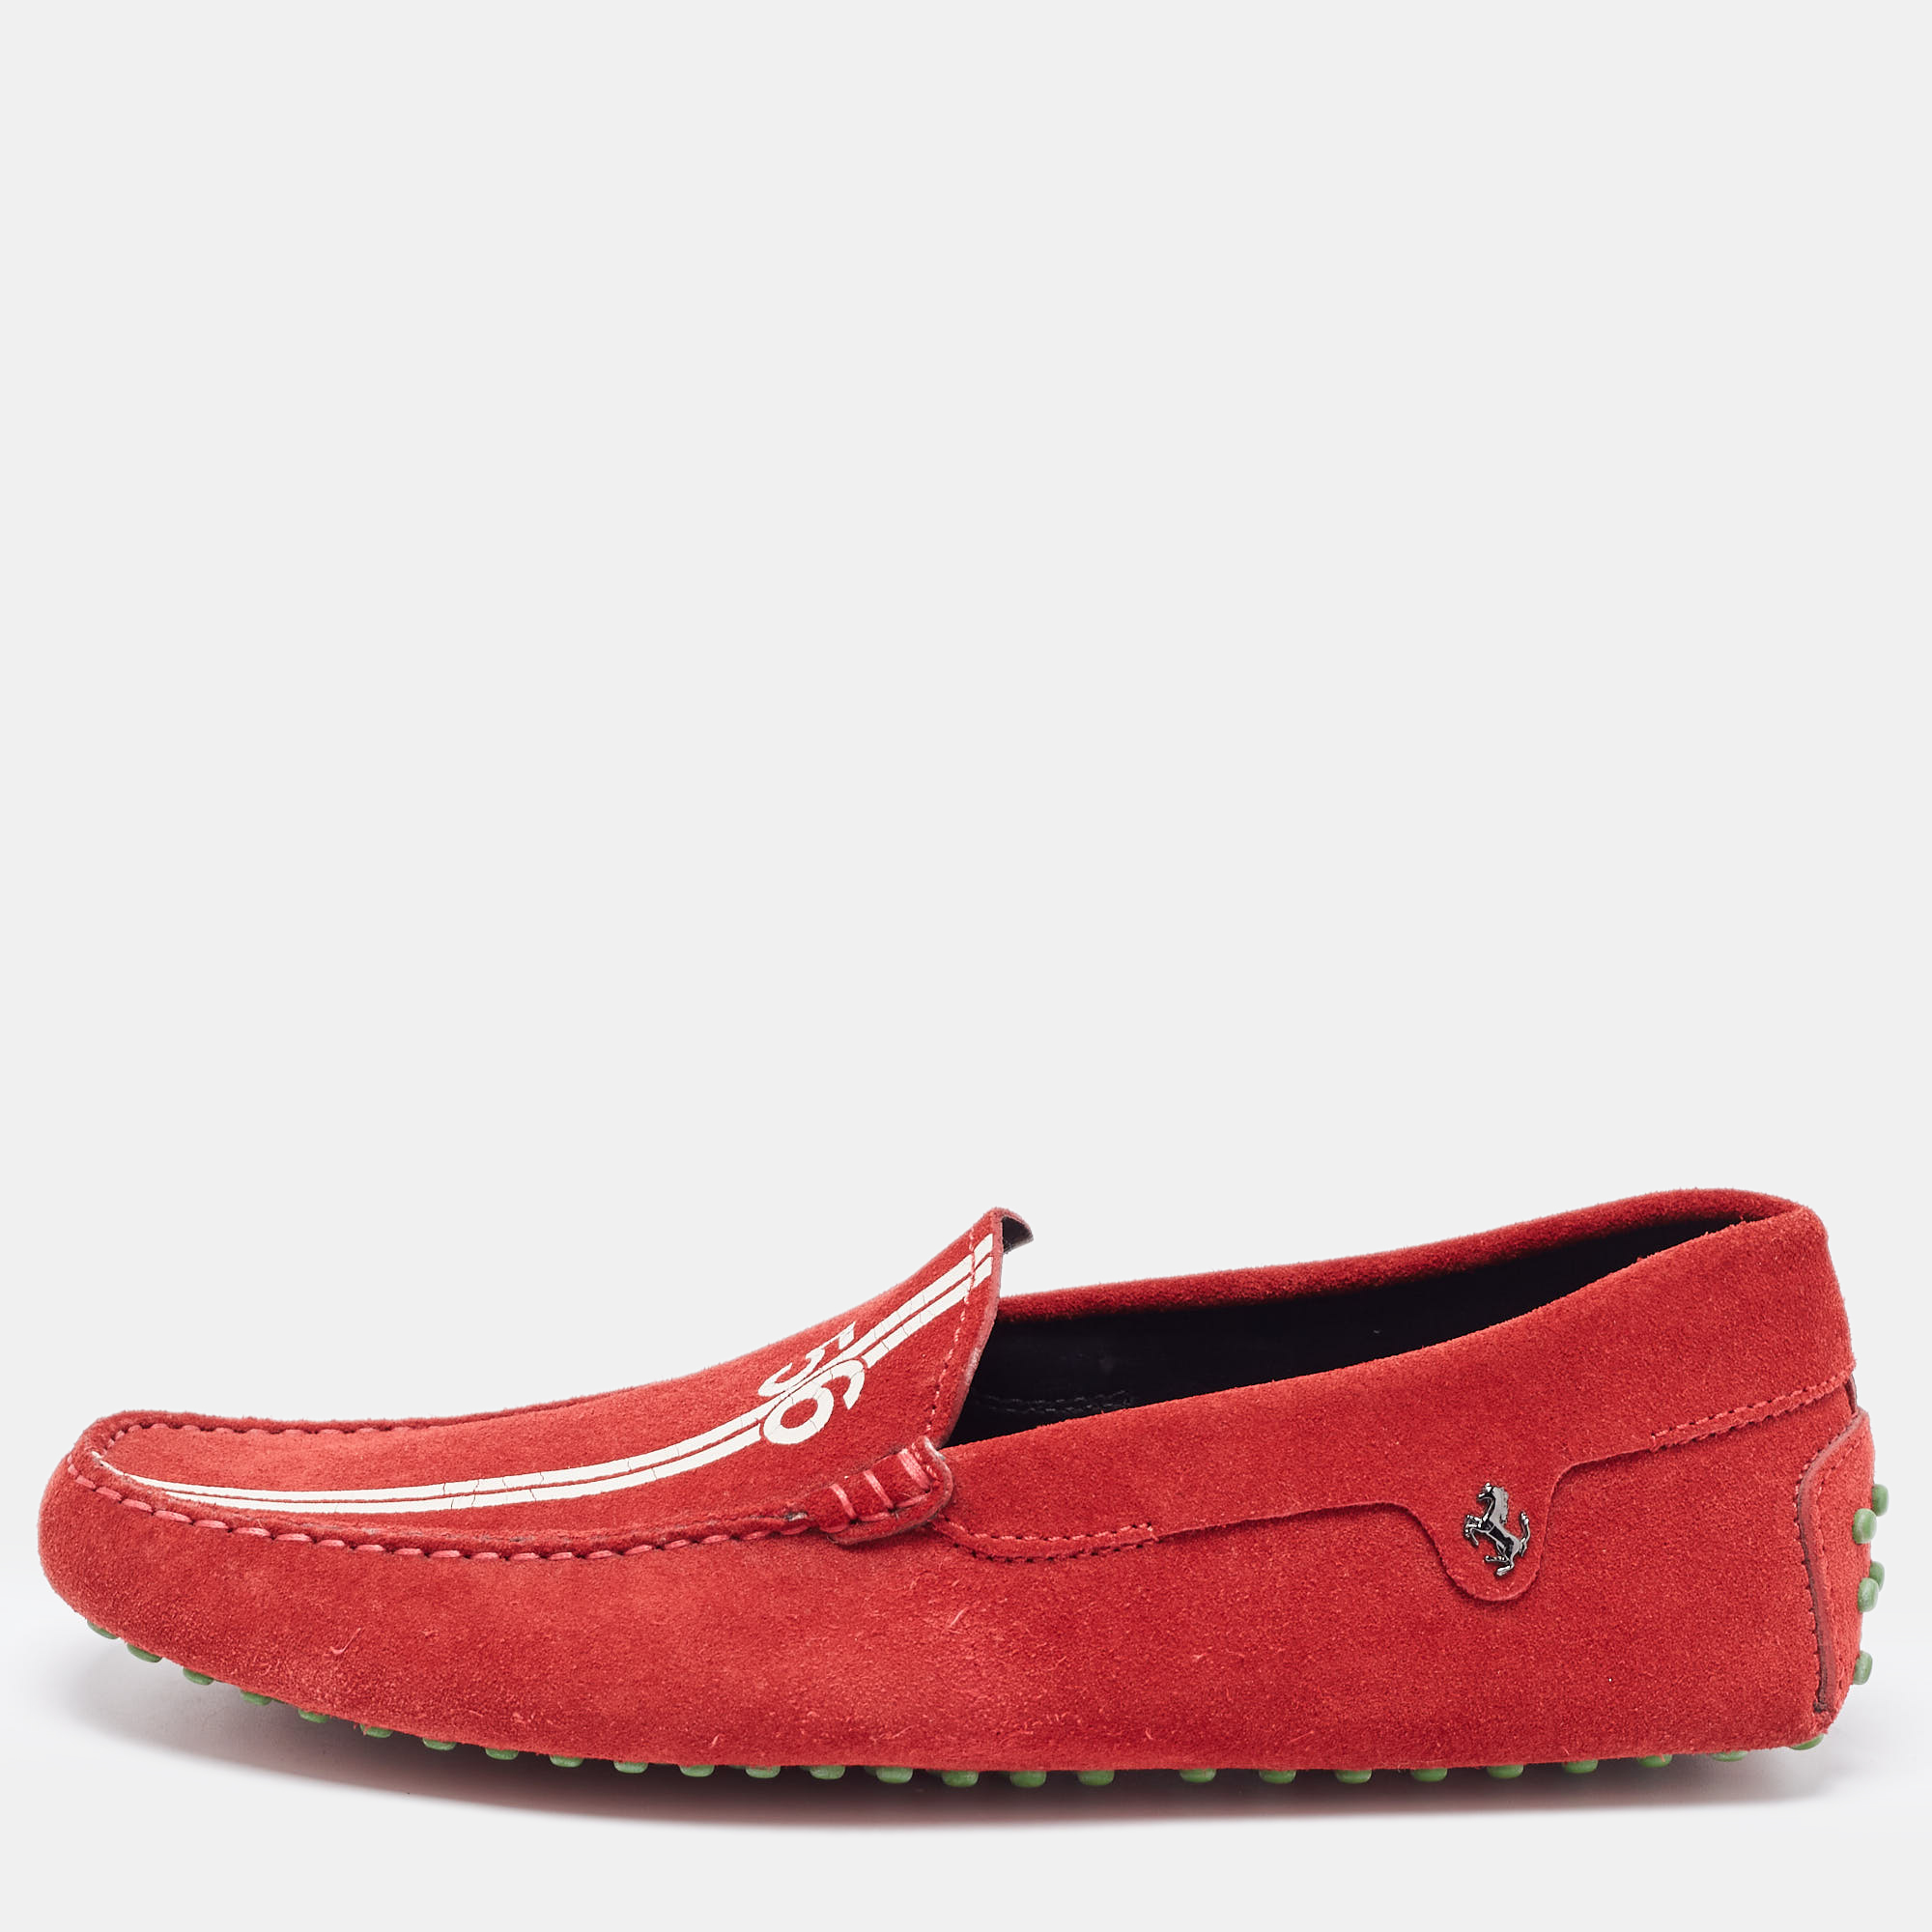 Tod's For Ferrari Red Suede Slip On Loafers Size 42